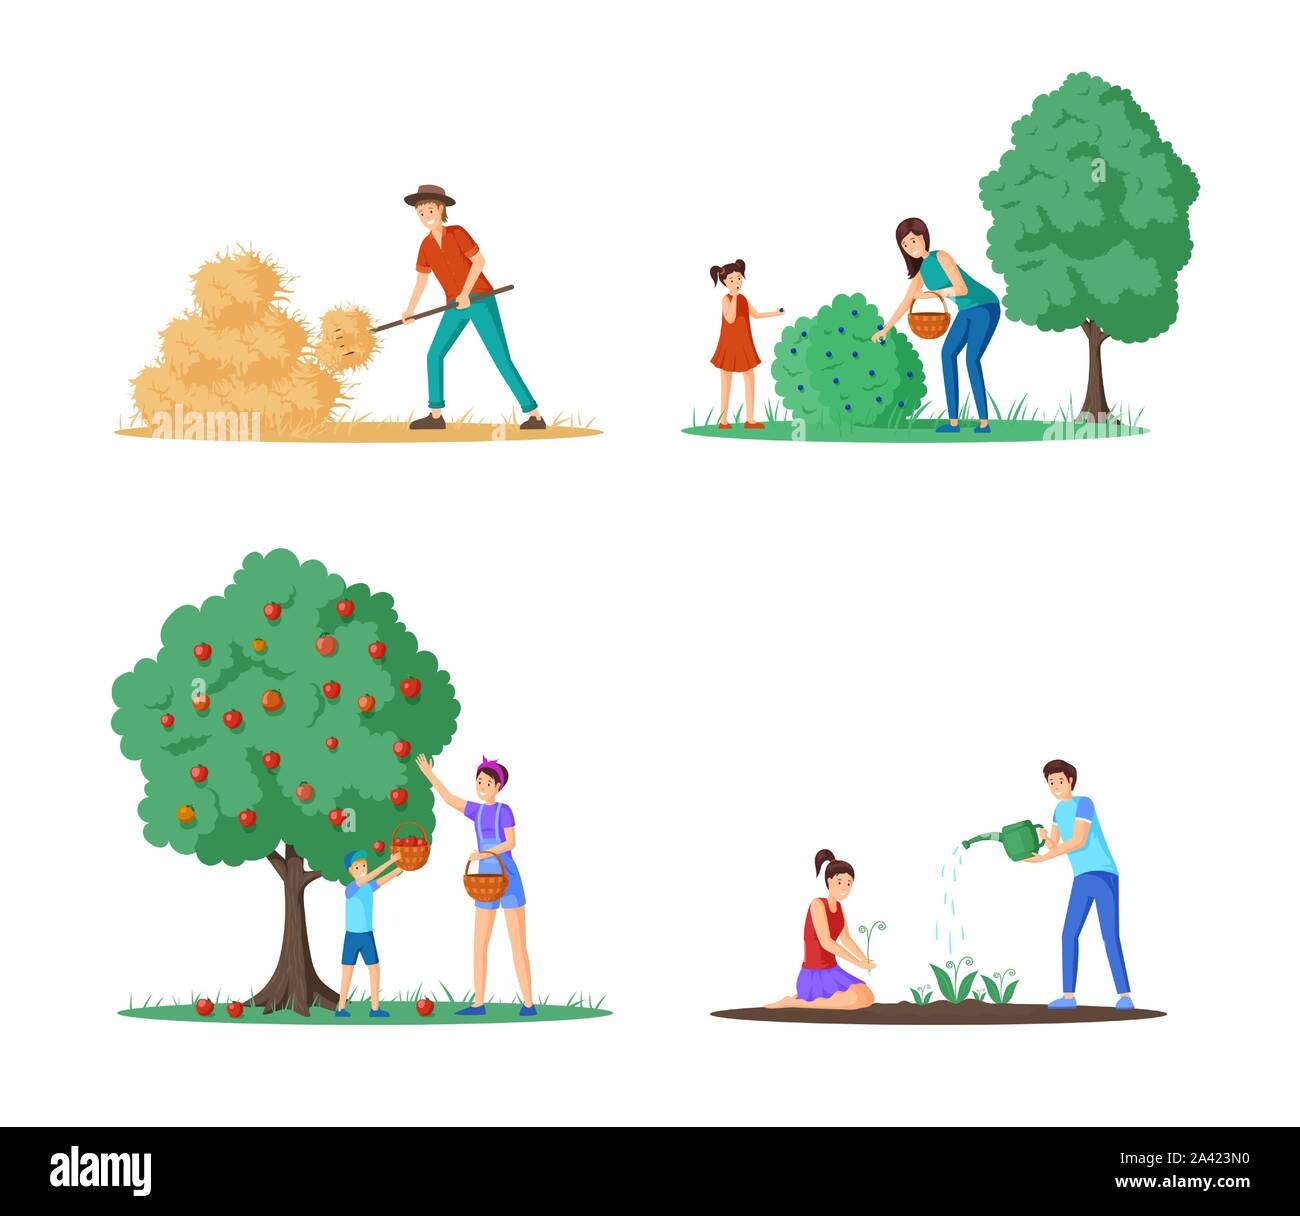 Farm harvesting season flat illustrations set. Cartoon rancher working with pitchfork near haystack, mother and child gathering apples and blueberries. Farmers growing and watering flowers Stock Vector